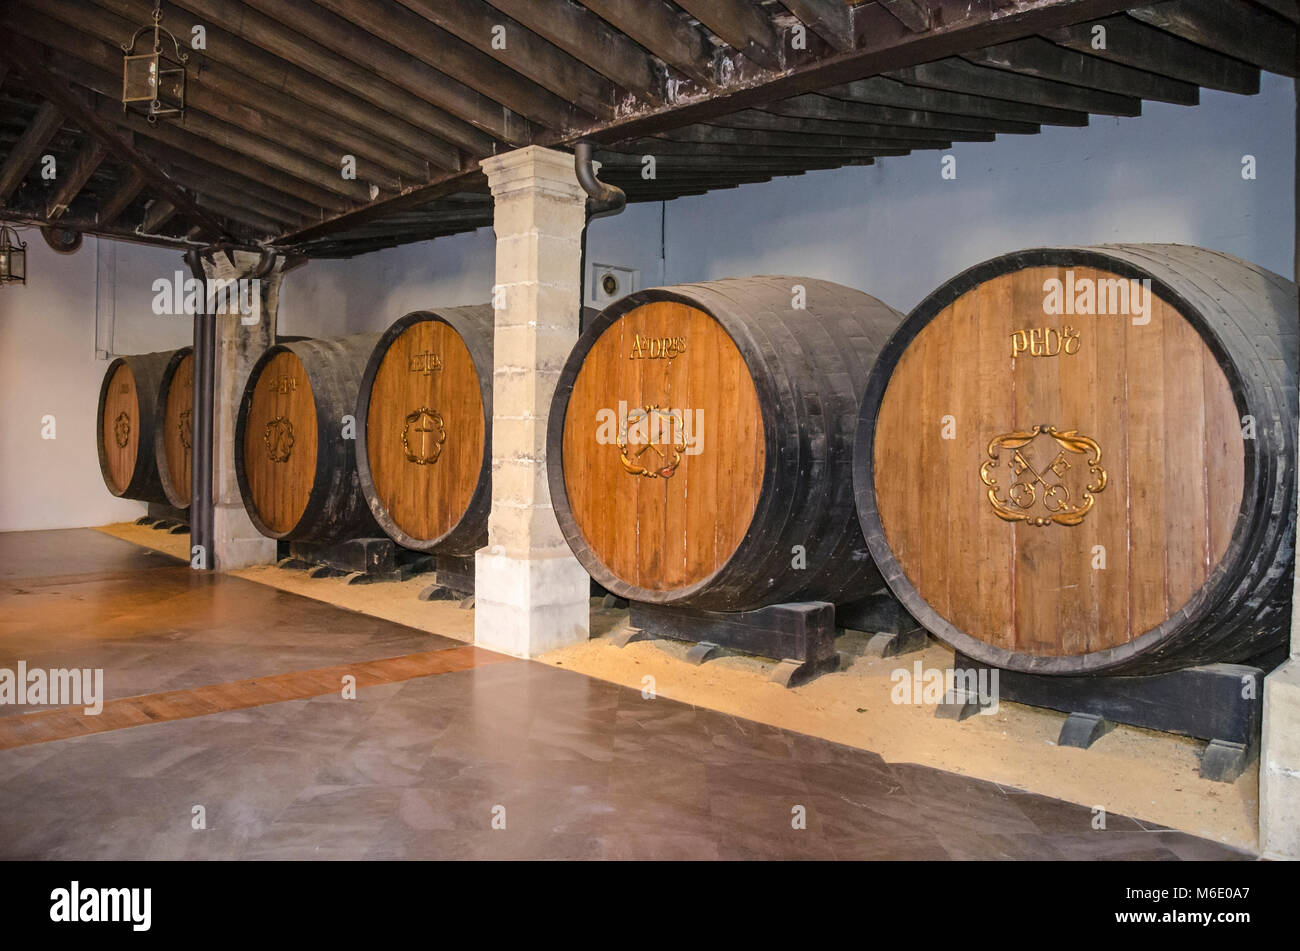 Jerez De La Frontera, Spain - May 26, 2015: Barrels with Sherry in Bodegas (winery) Tio Pepe in Jerez, known as the world capital of sherry wine. Stock Photo